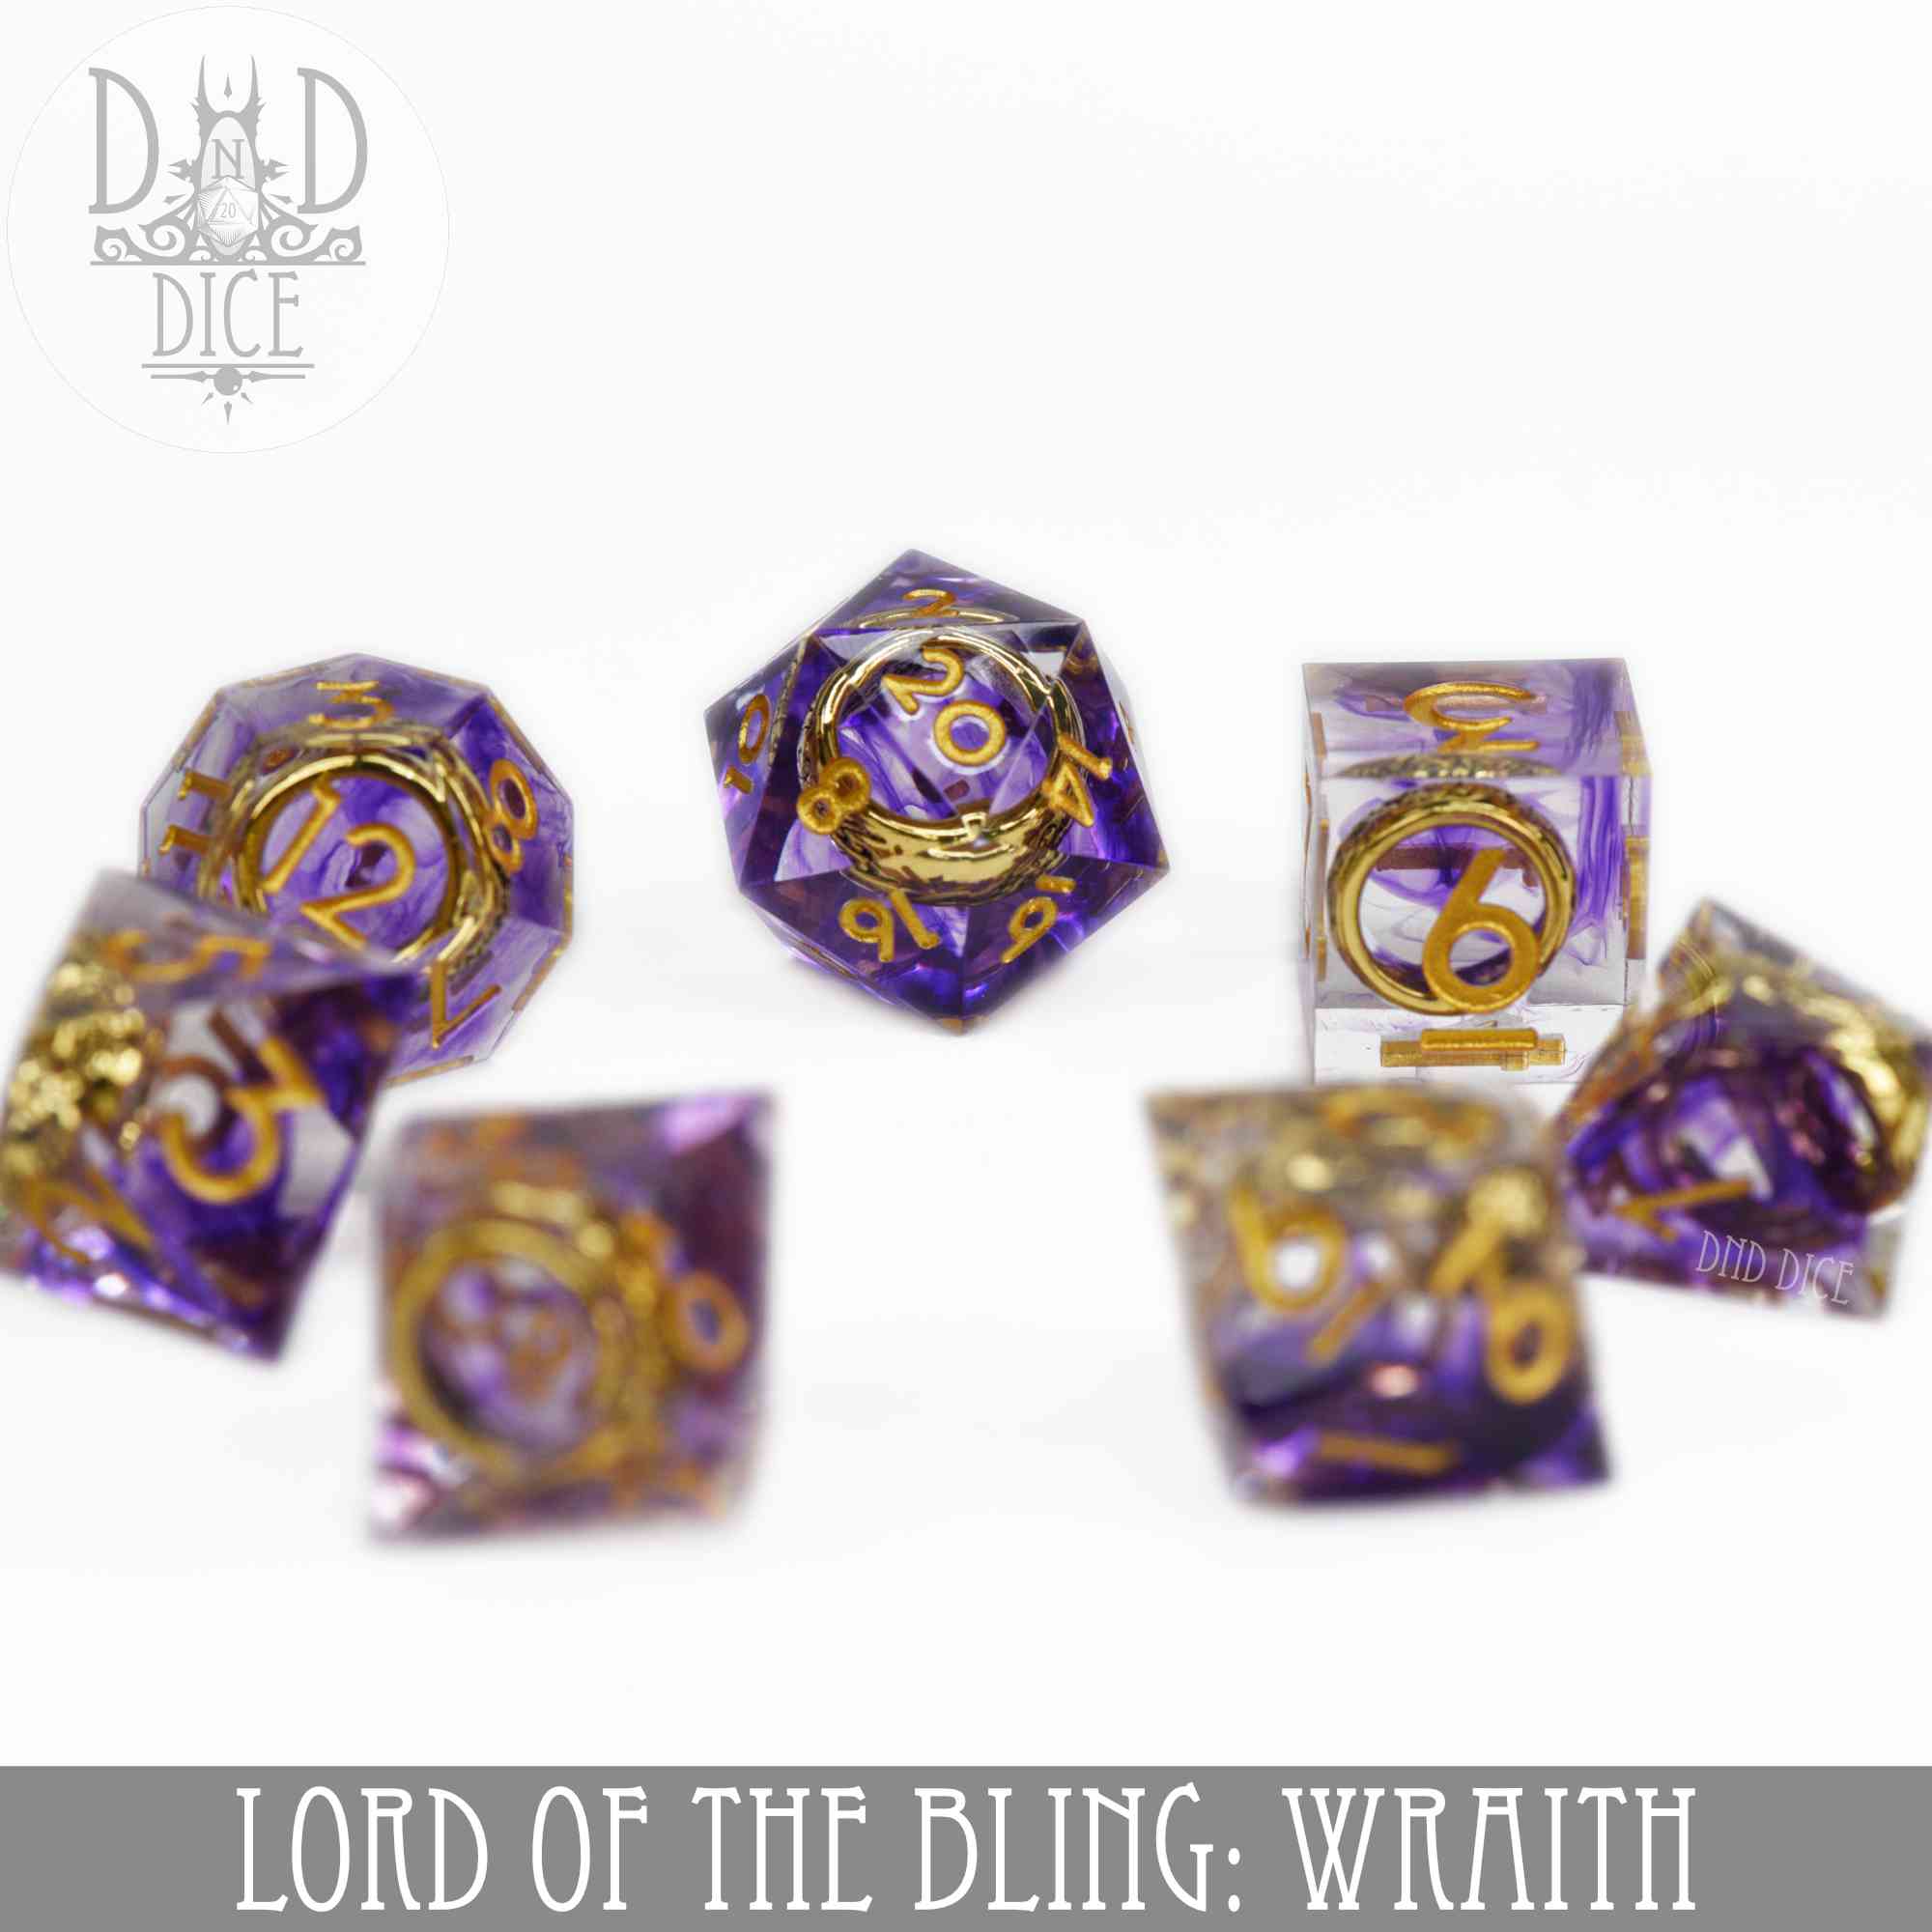 Lord of the Bling: Wraith Handmade Dice Set